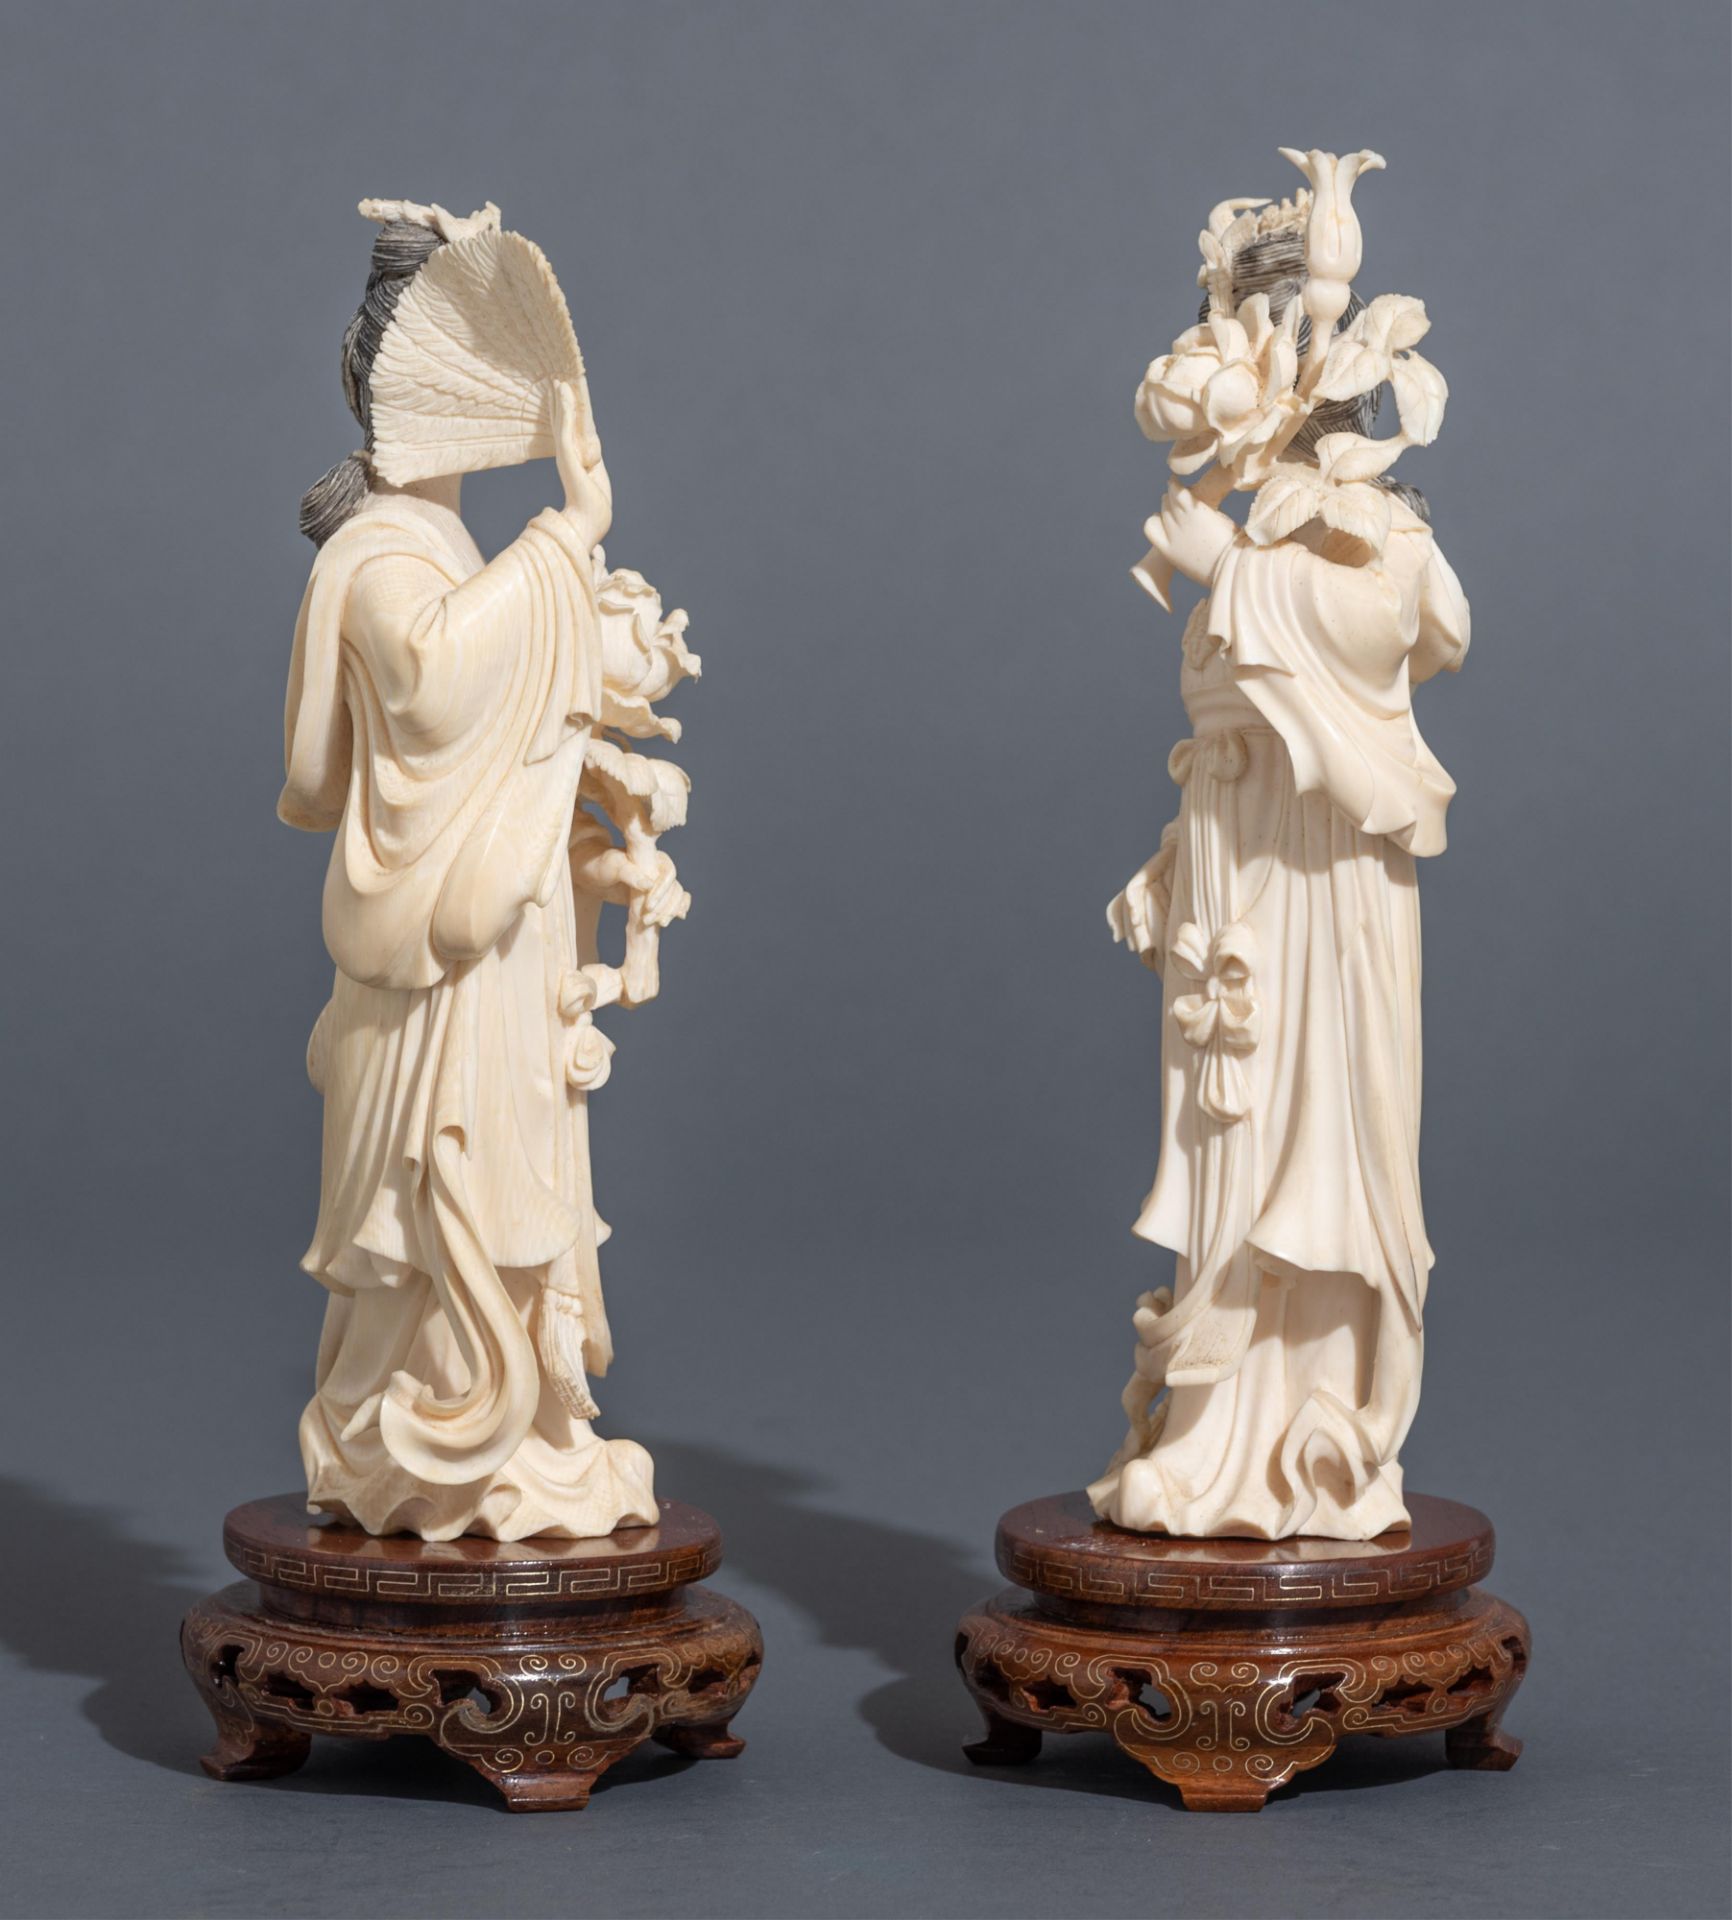 Two ivory Chinese beauties on wooden bases, first half 20thC, H 24 - 25 cm, - Image 3 of 6